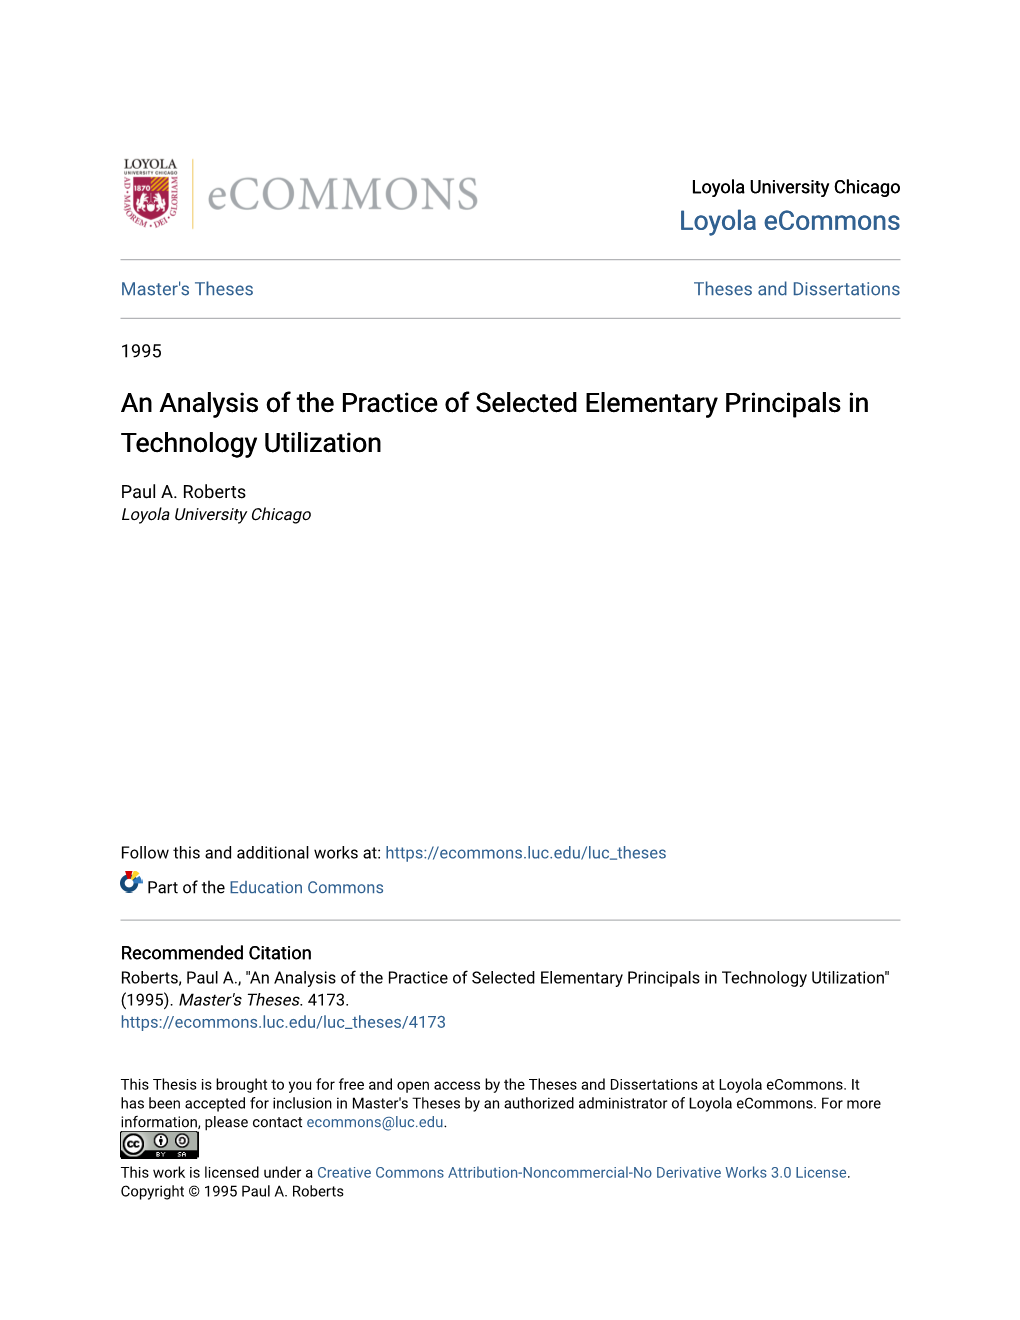 An Analysis of the Practice of Selected Elementary Principals in Technology Utilization